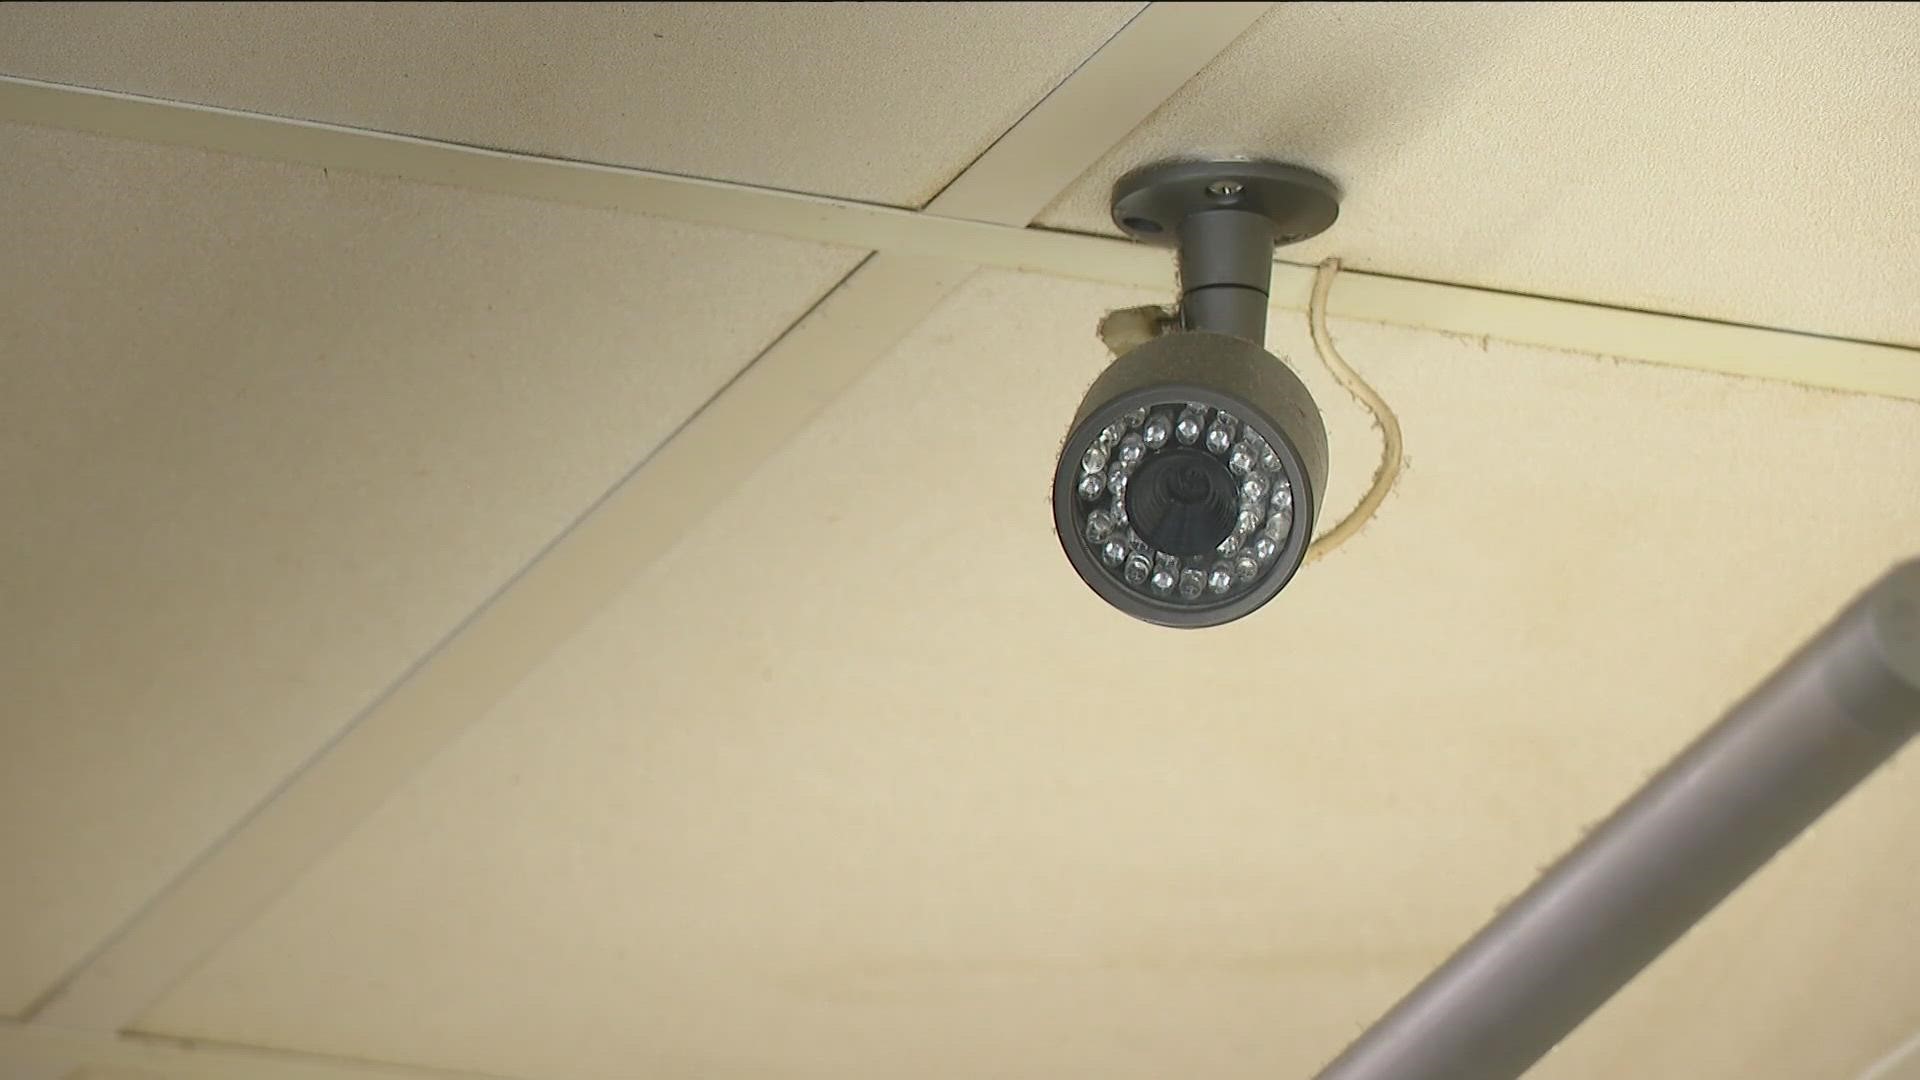 Some owners say they are having to spend money to pay for extra security measures in ways they haven't had to before.